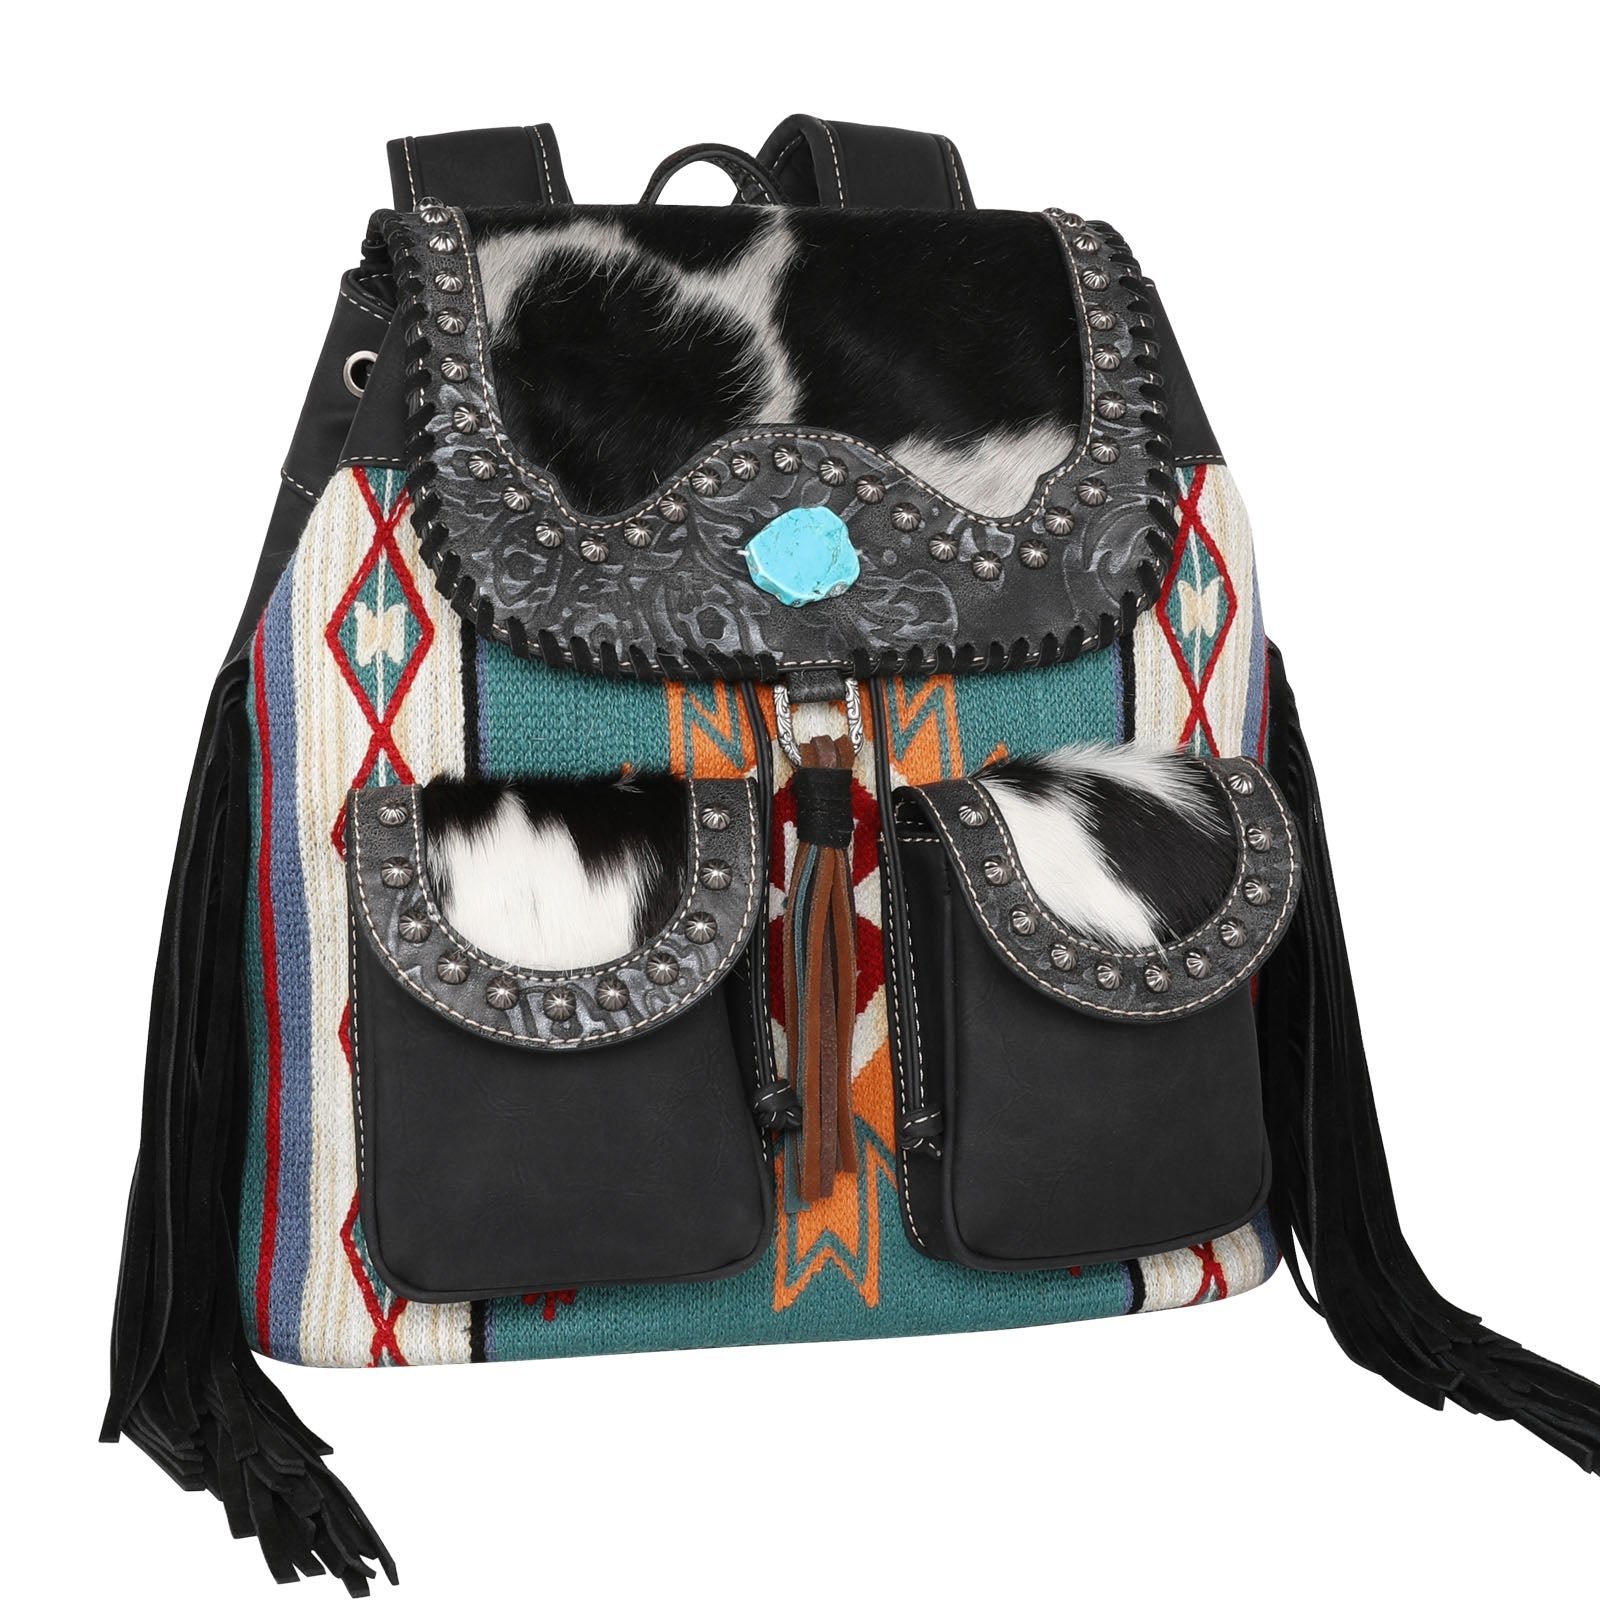 Montana West Hair-On Cowhide Collection Aztec Tapestry Backpack - Cowgirl Wear